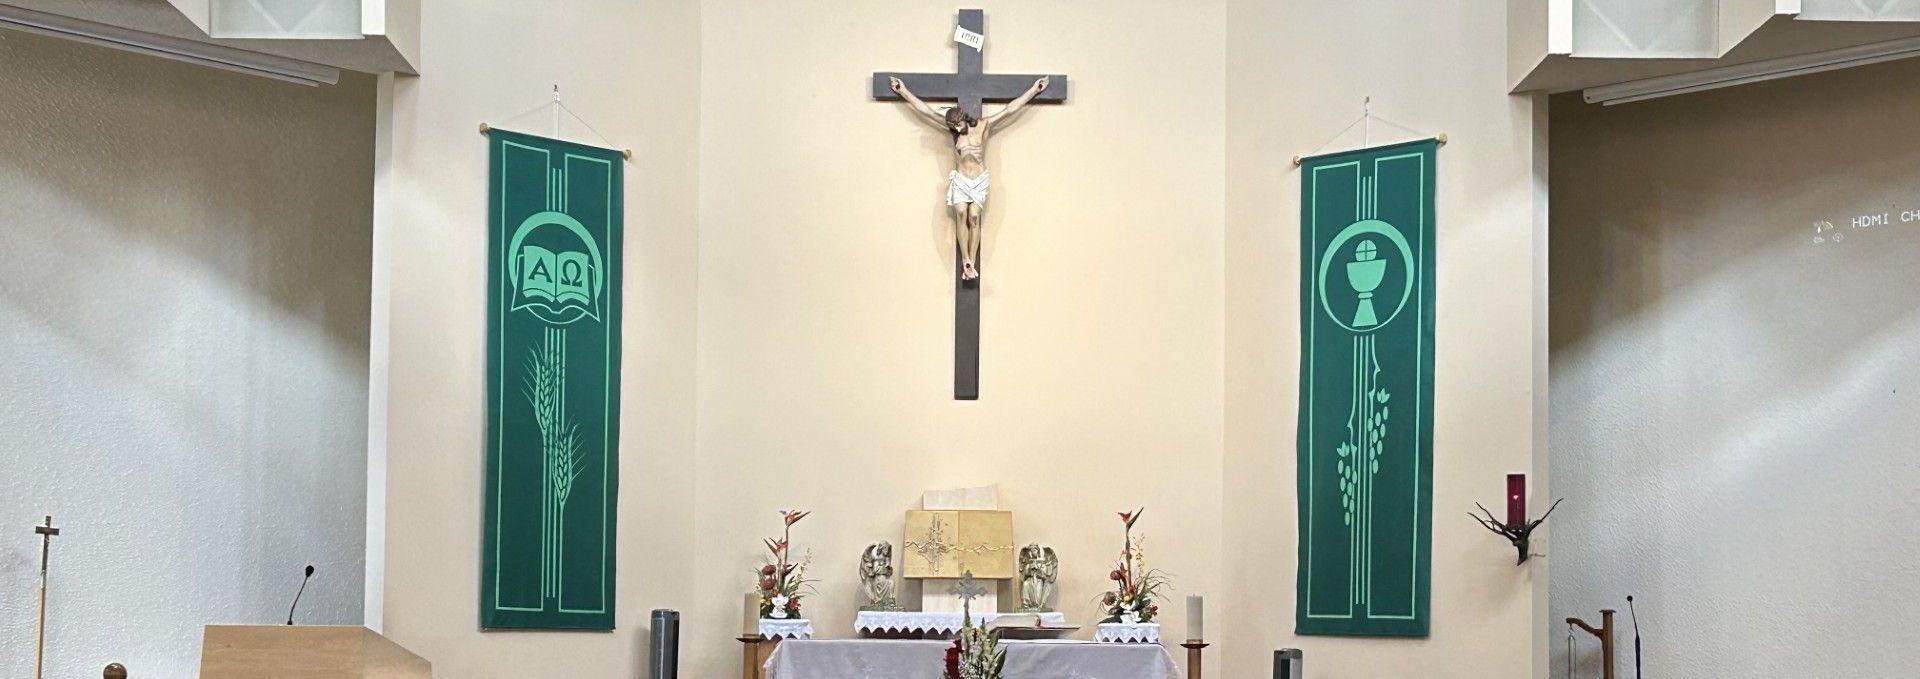 Sanctuary of Sts. Martha and Mary